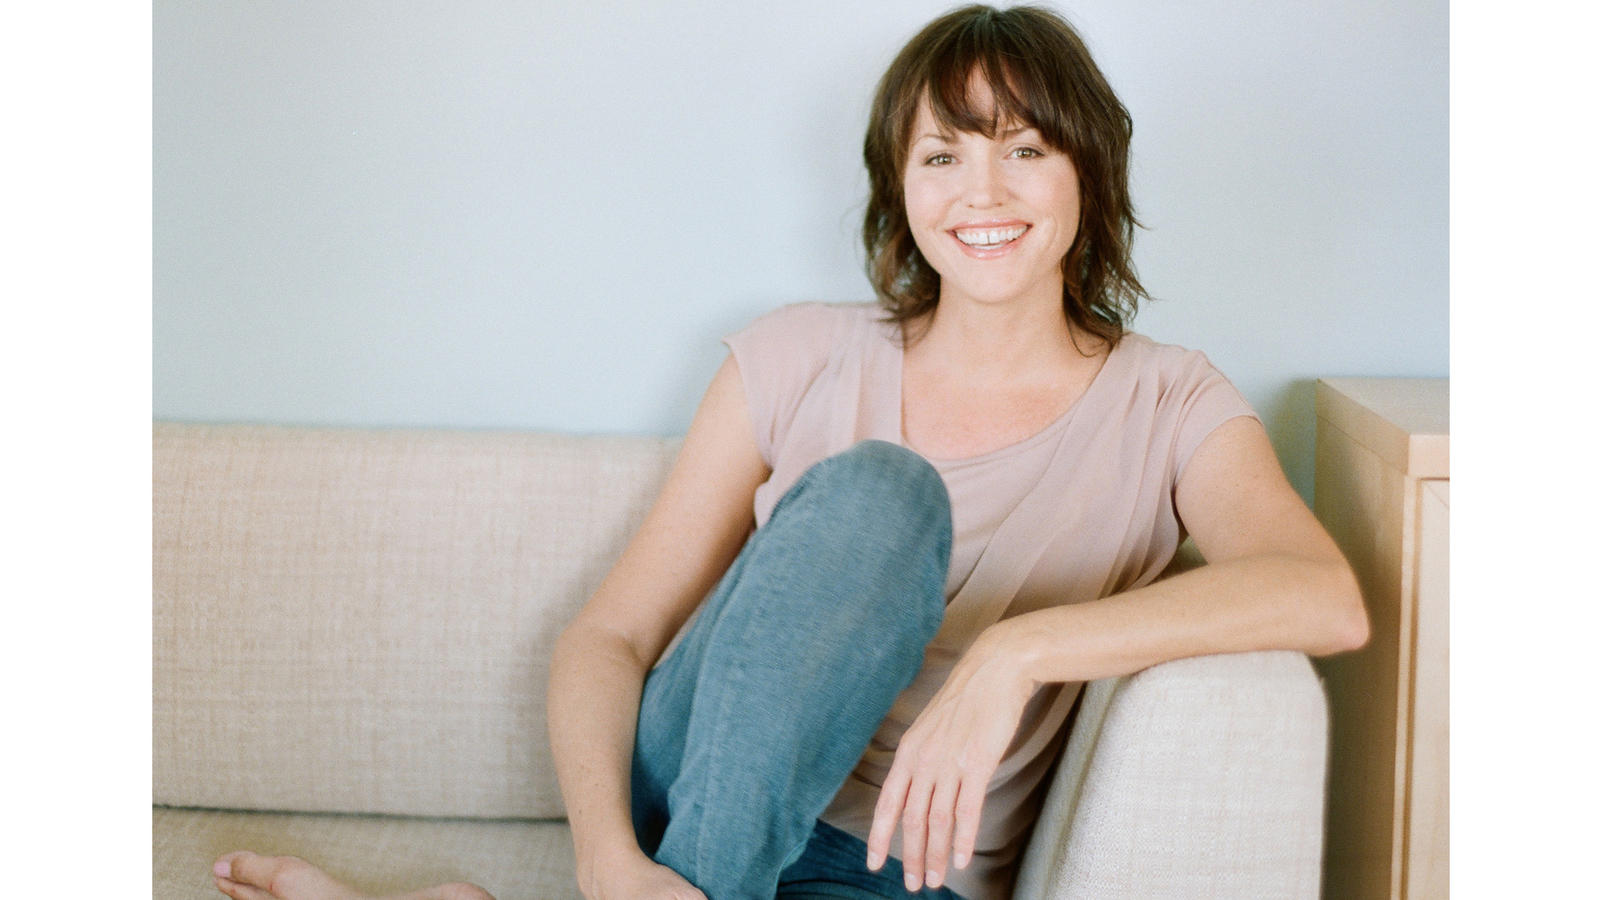 As 'CSI' comes to a close, actress Jorja Fox is open to an uncertain future (Los Angeles Times)